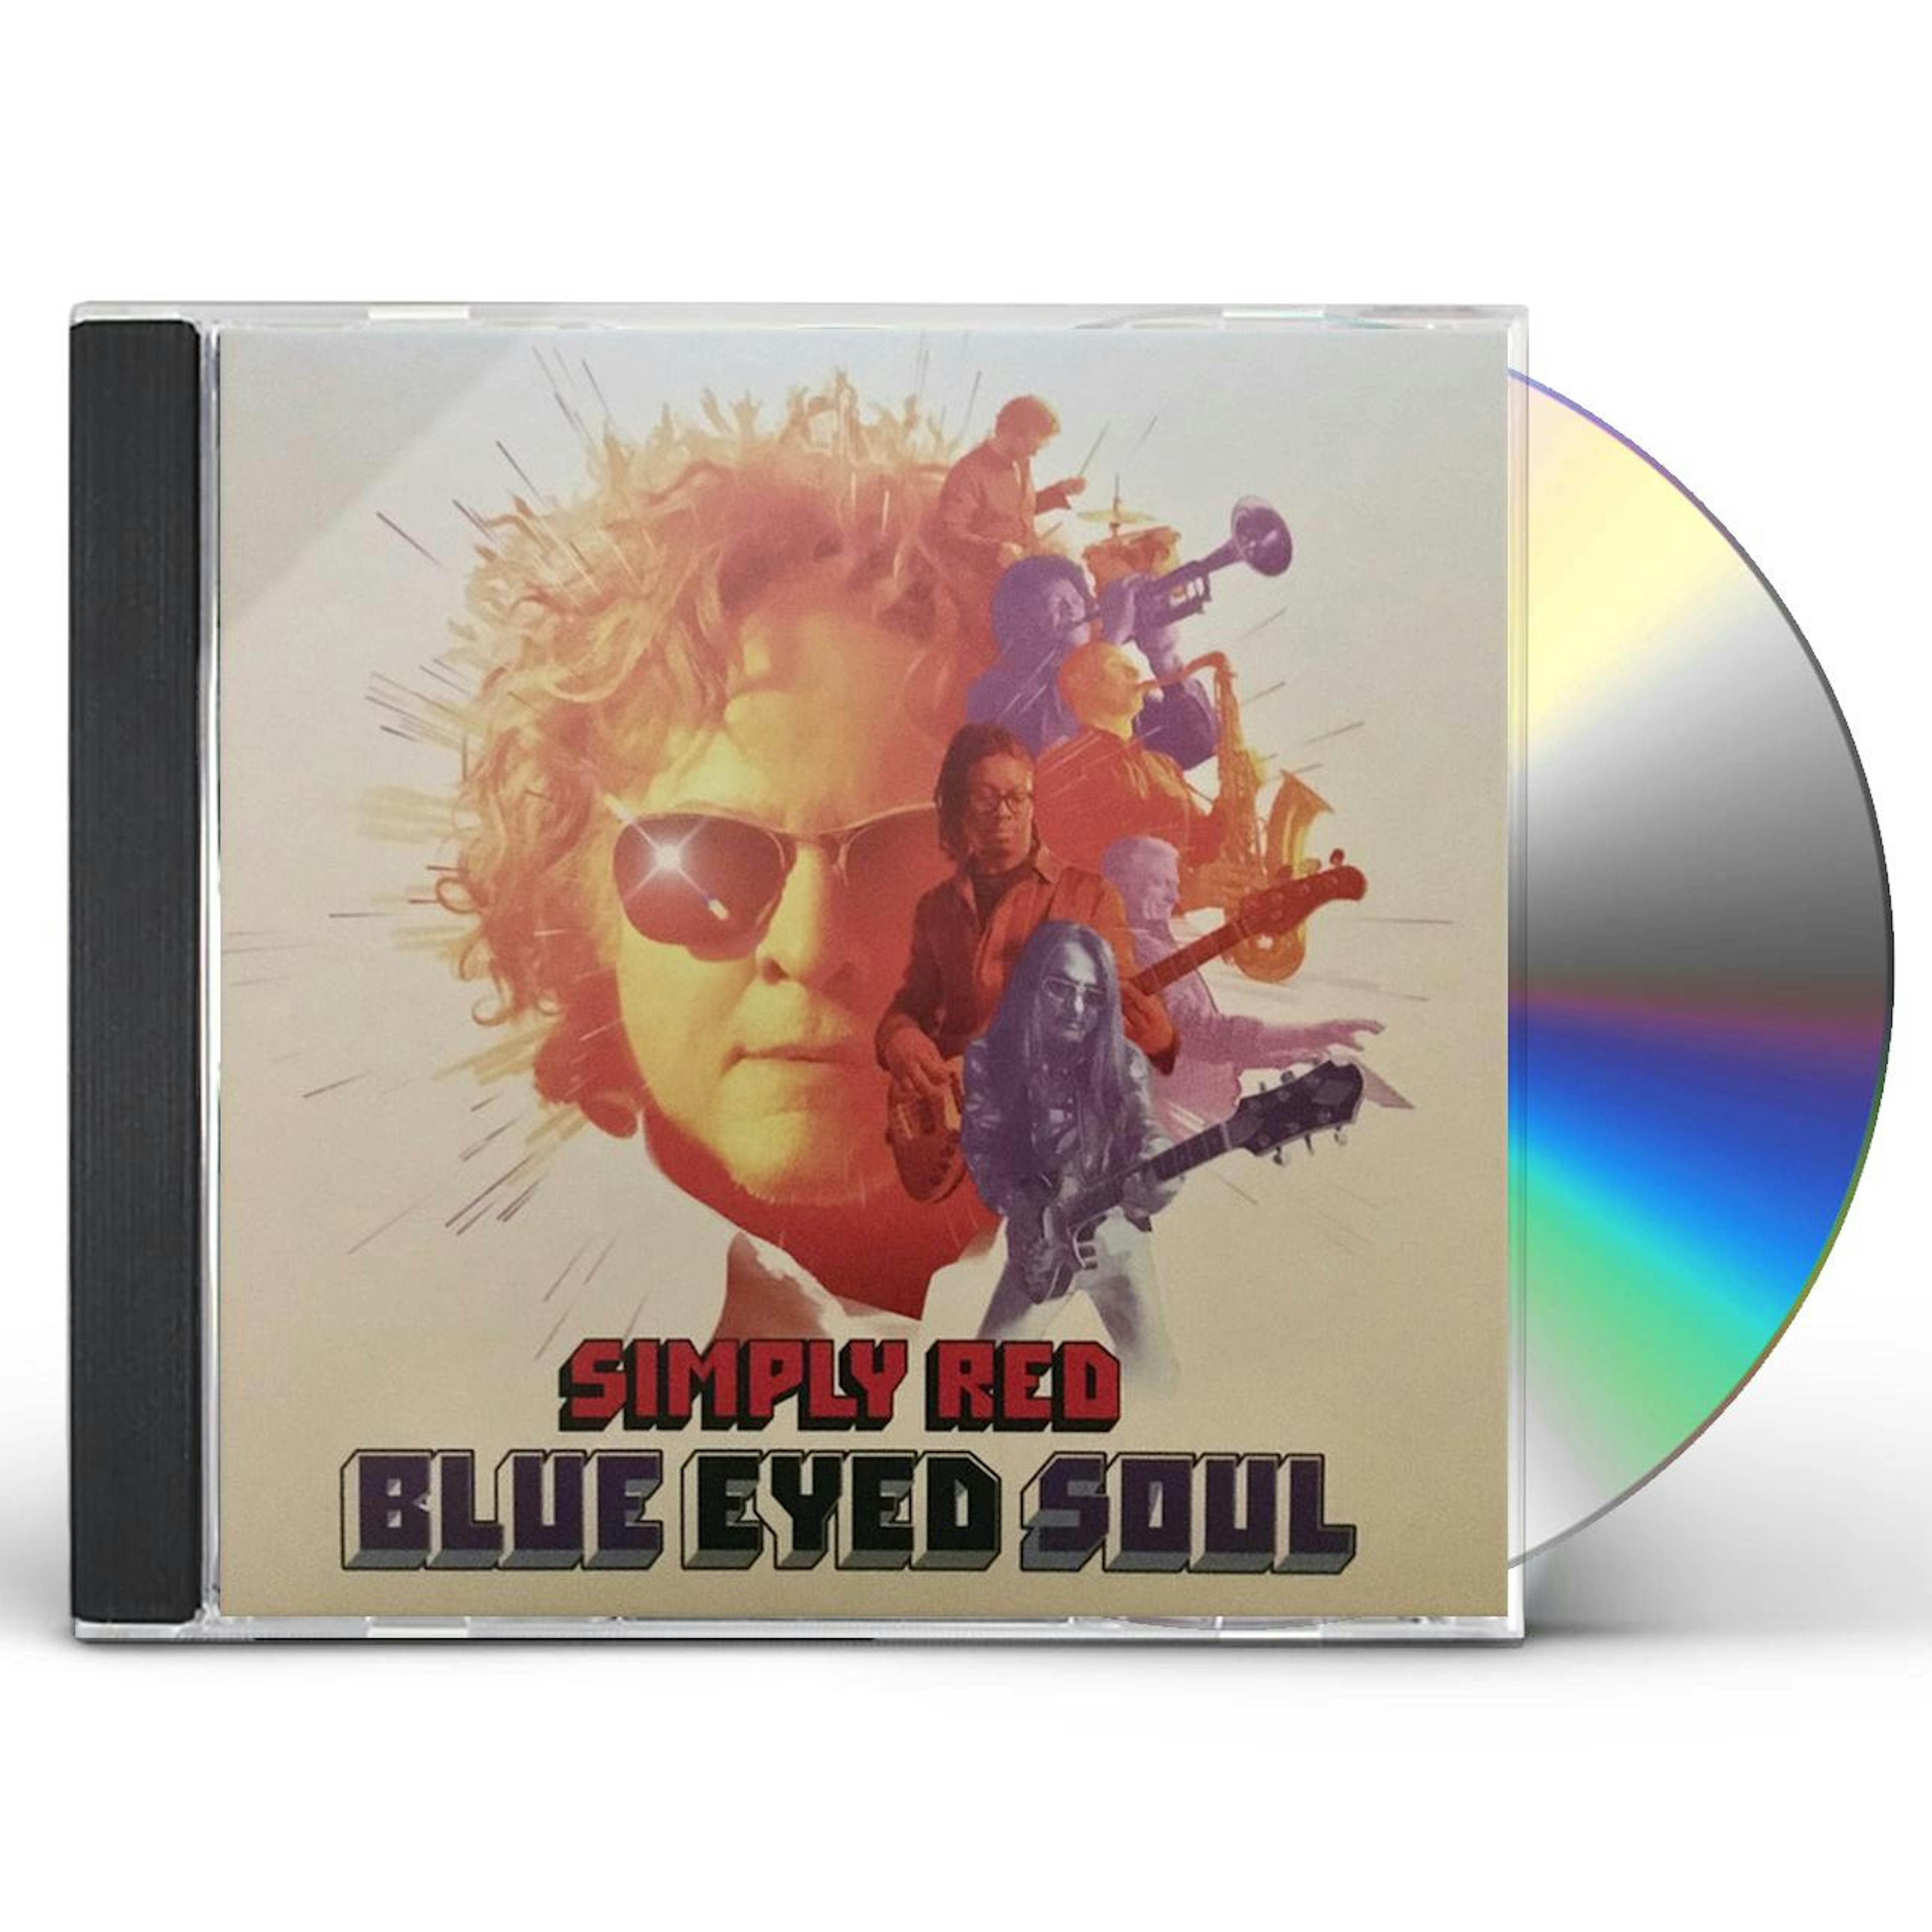 Simply Red EYED CD